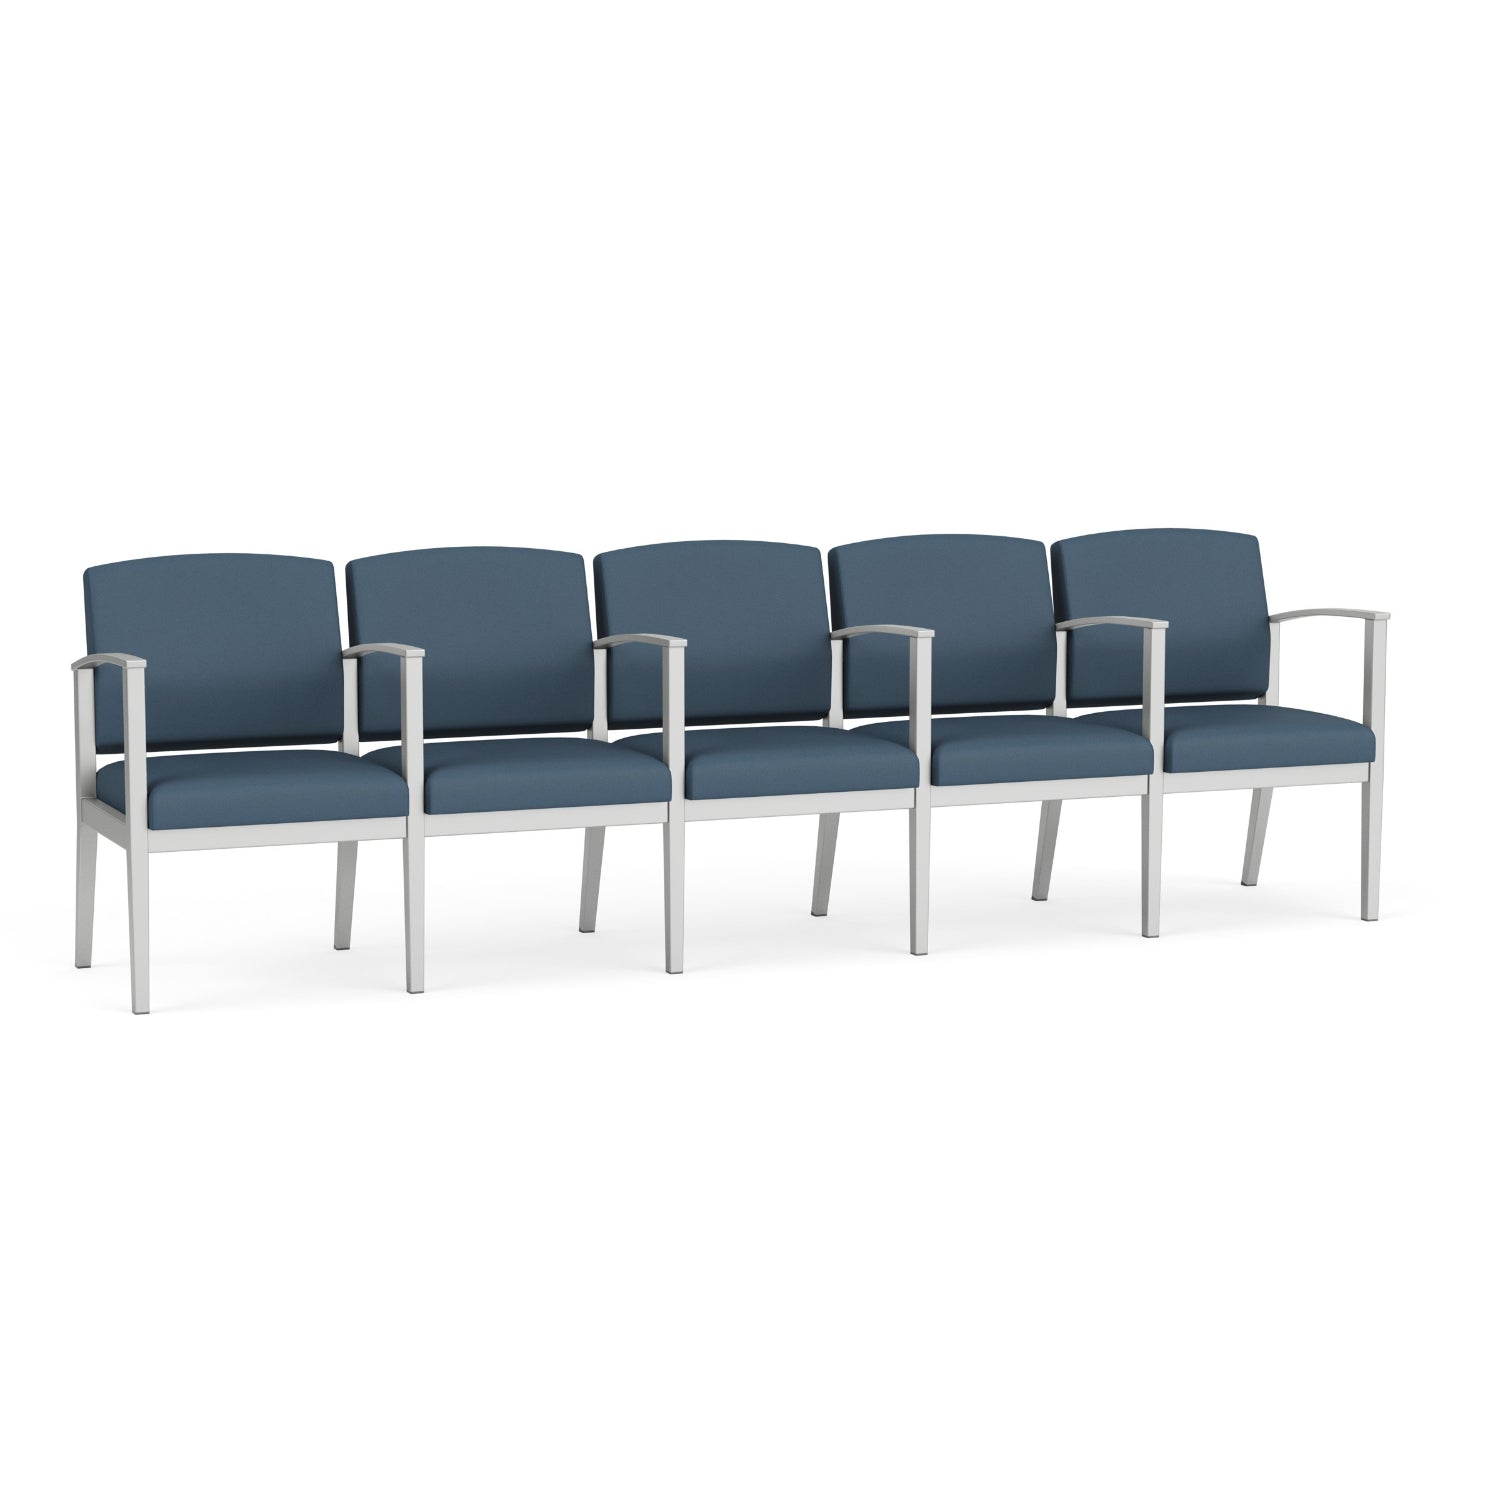 Amherst Steel Collection Reception Seating, 5 Seats with Center Arms, Standard Vinyl Upholstery, FREE SHIPPING